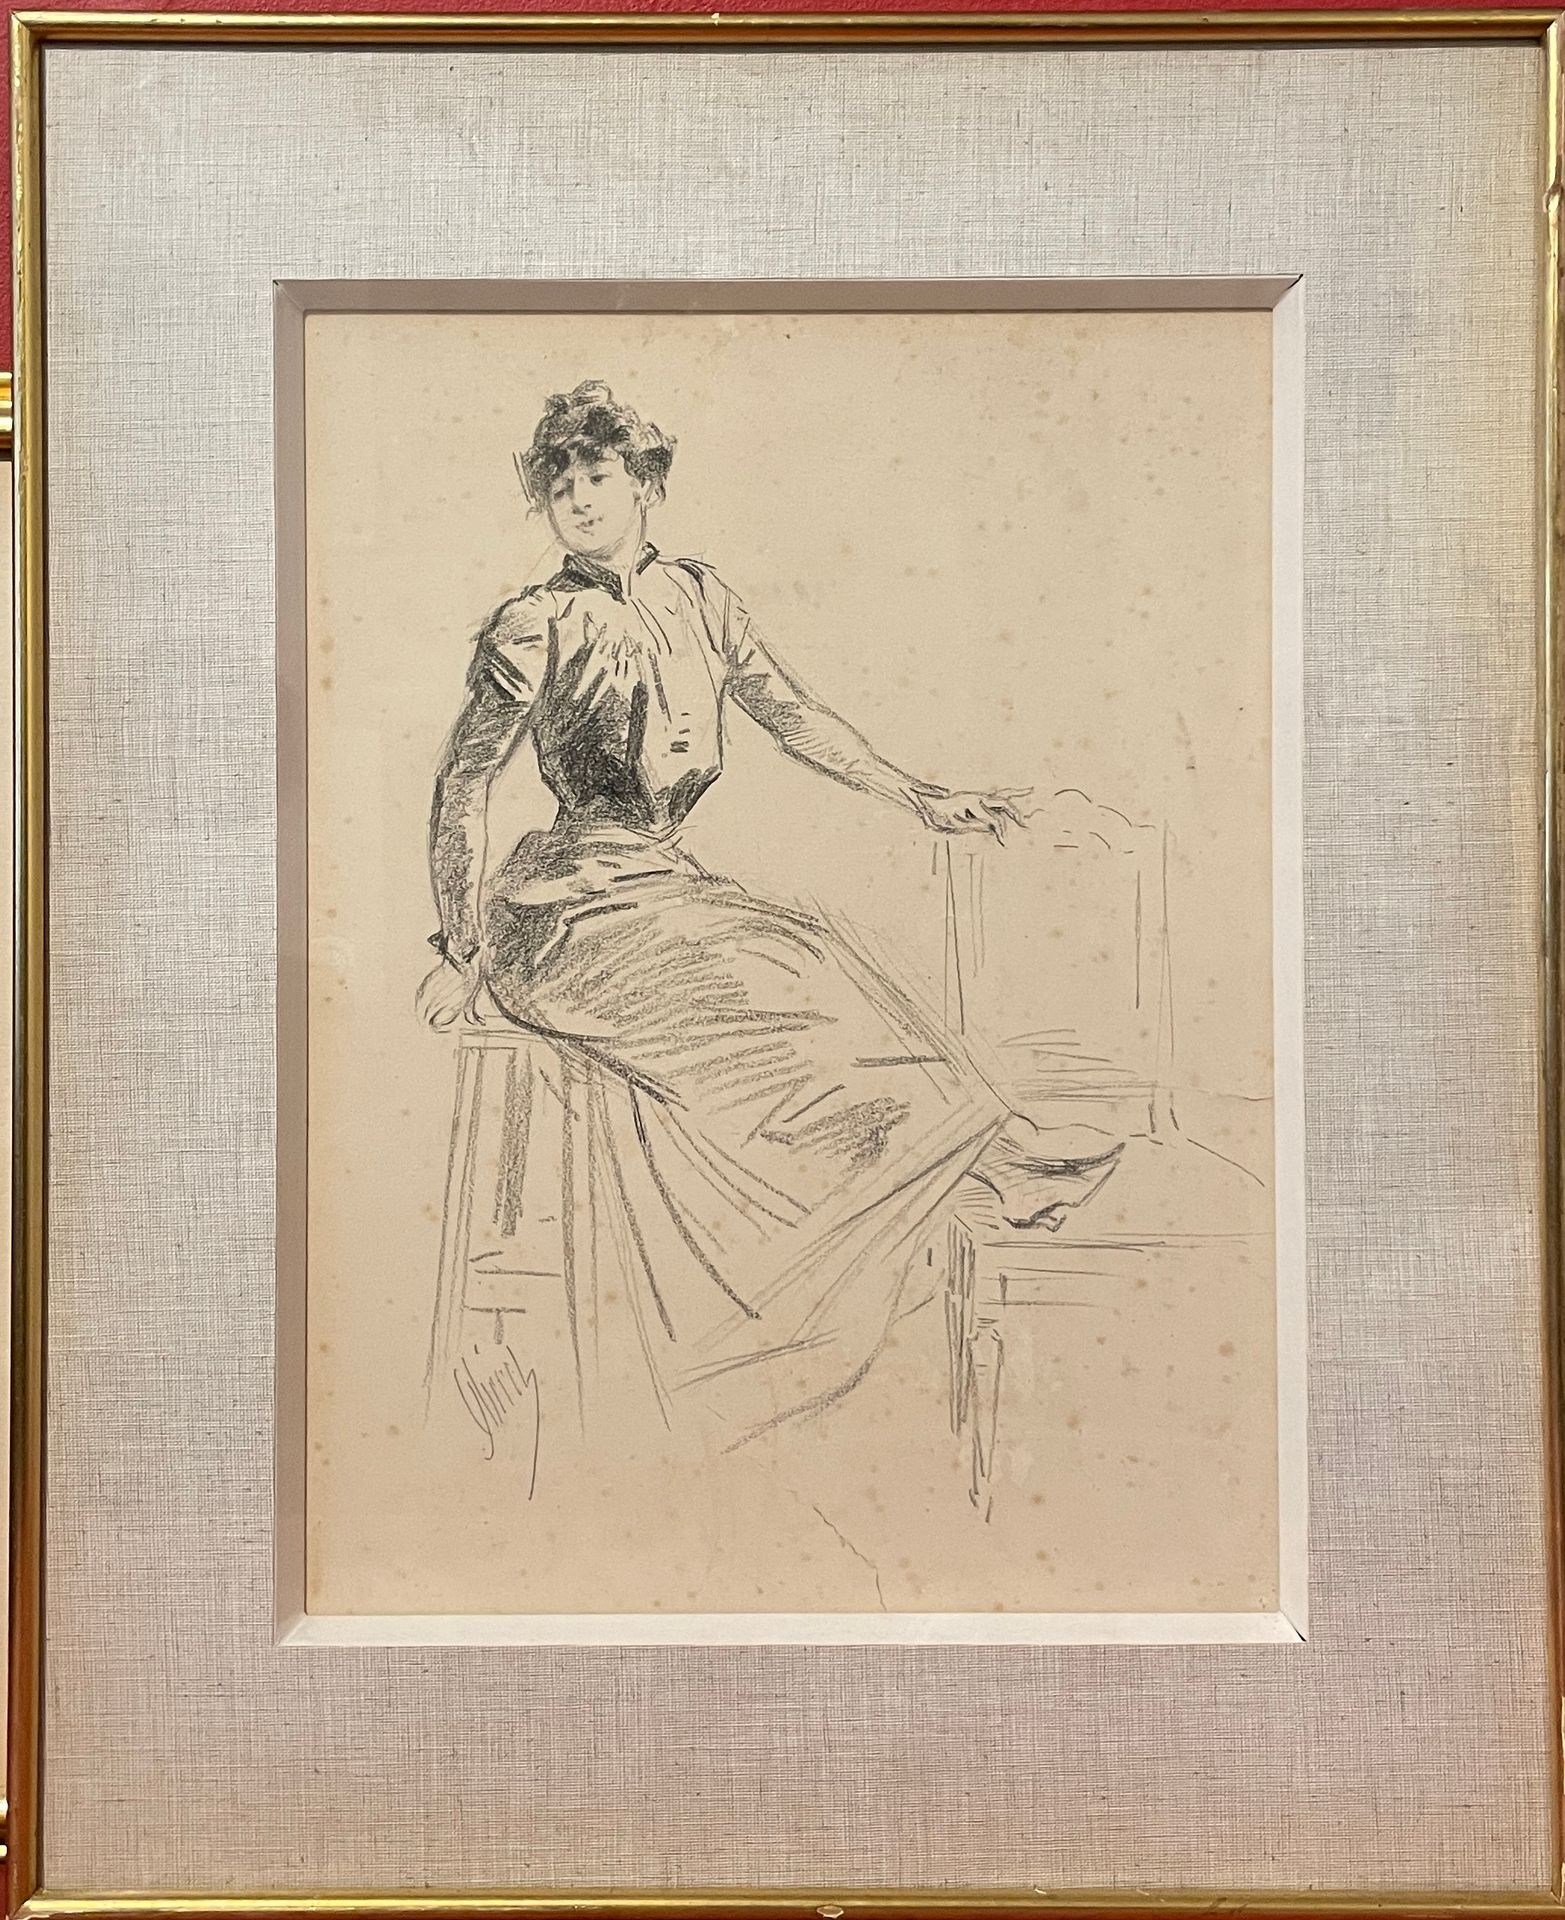 Null Jules CHERET (1836 - 1932)

Woman posing on a stool

Charcoal

35 x 26 cm

&hellip;